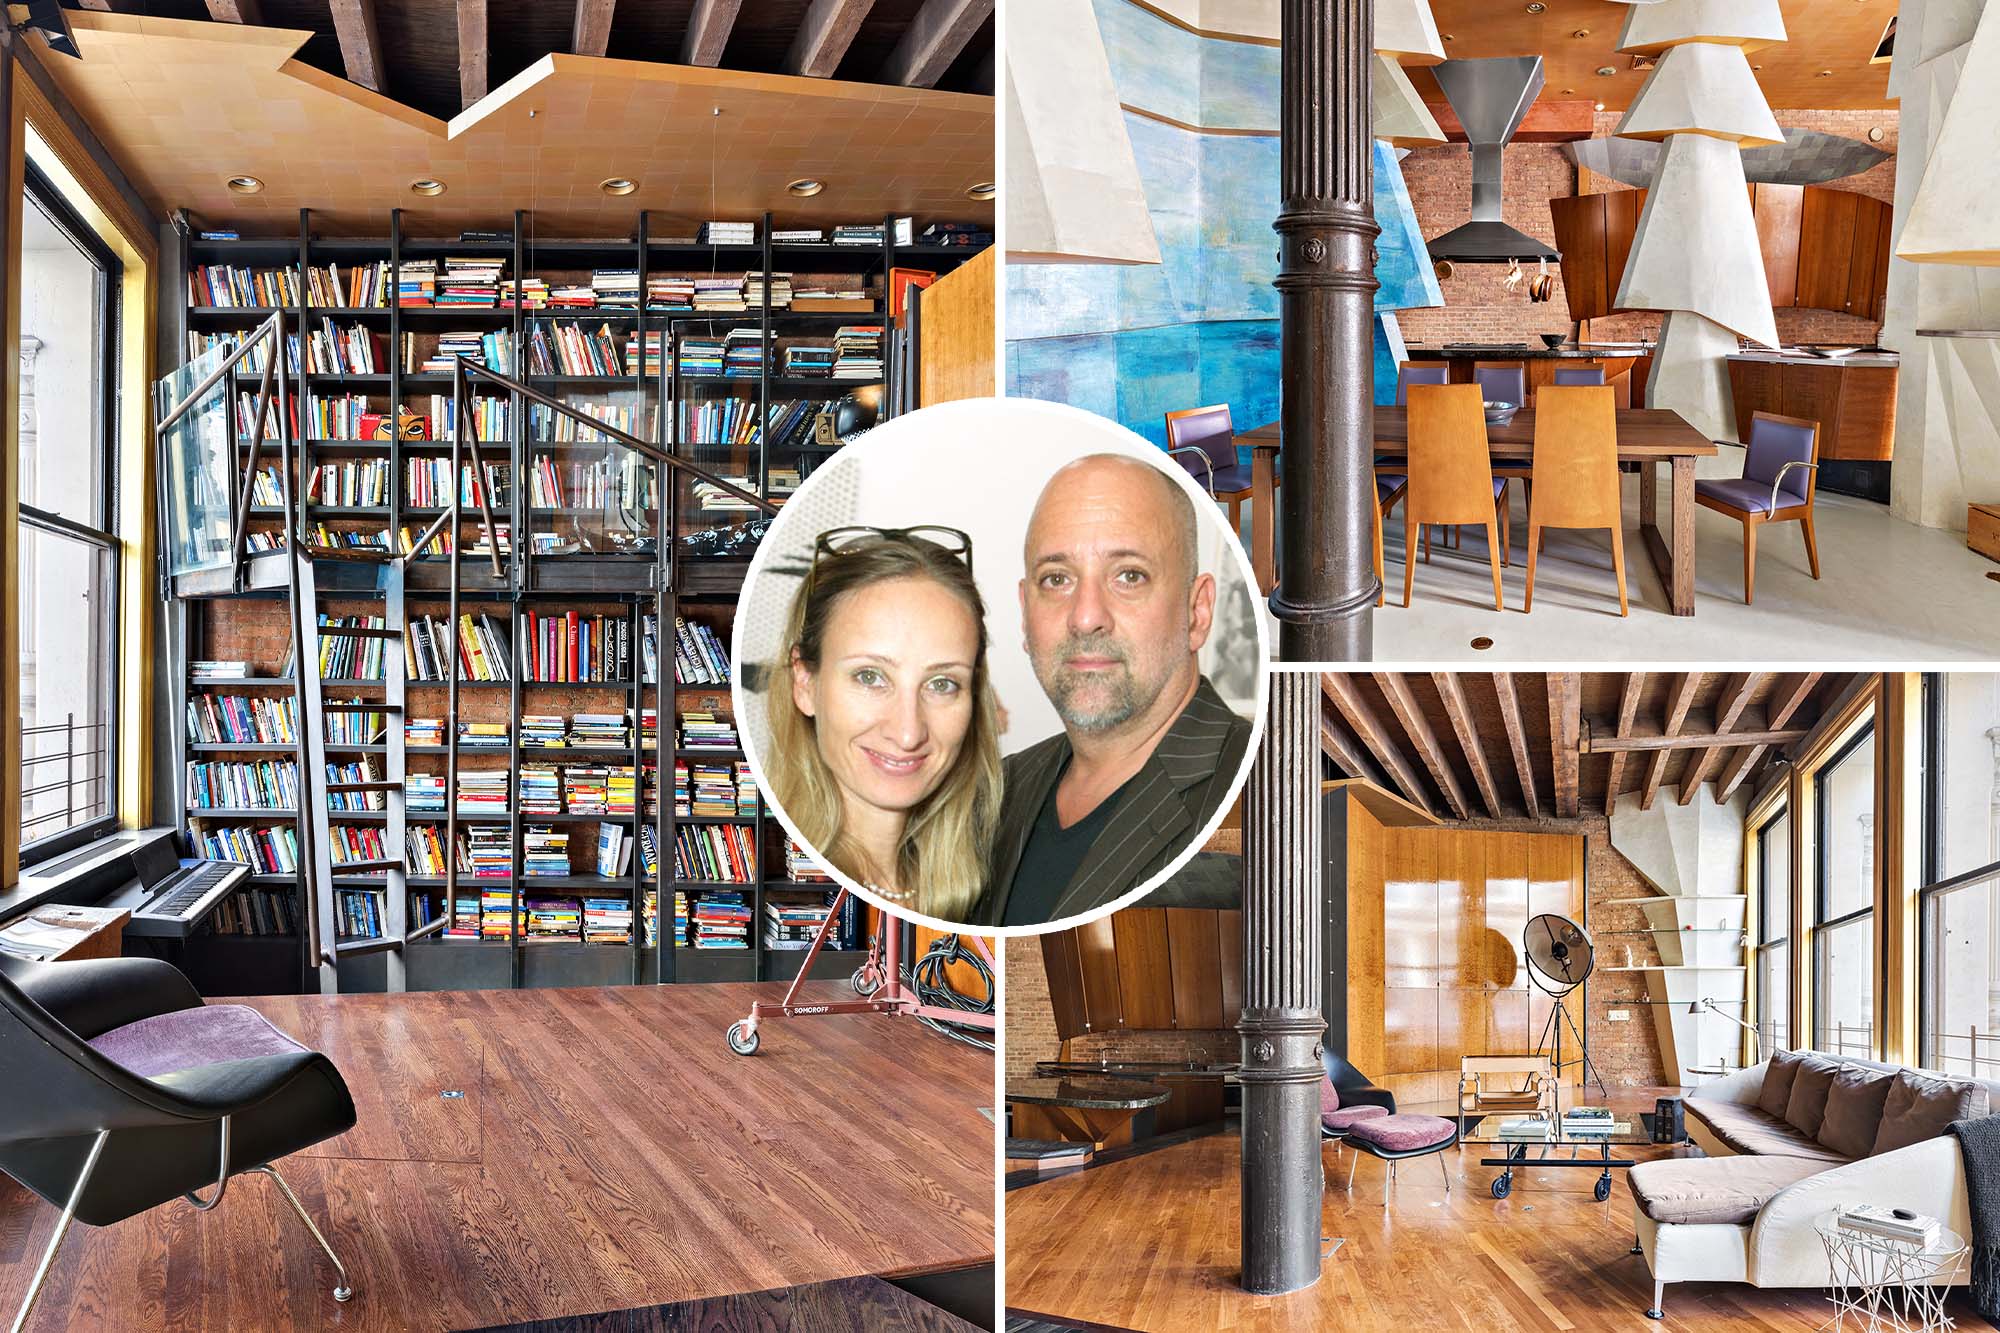 Michael Somoroff and his wife Irina are sweetening the deal for their standout Prince Street loft with an NFT.